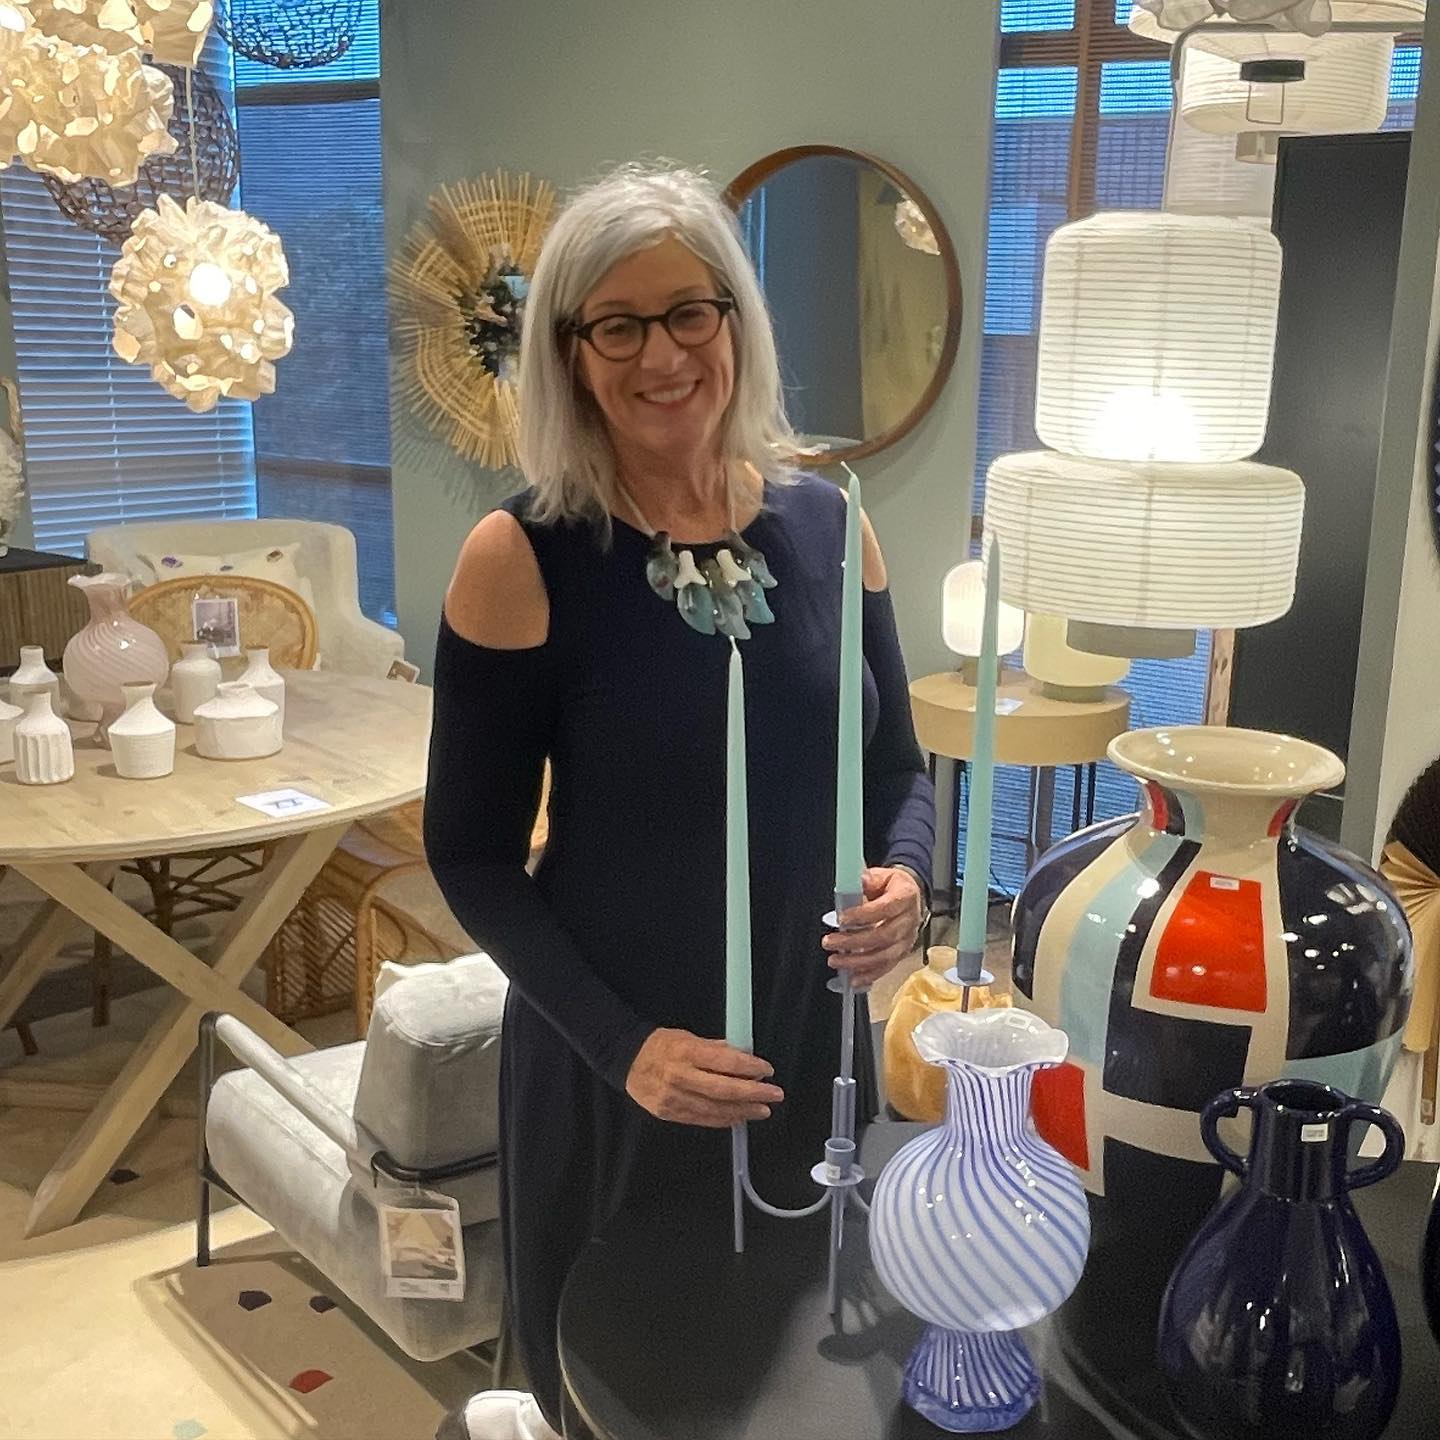 What a busy day @maytimeliving showroom launching our new Spring/Summer range. Always a pleasure having our rep Carol Kavanagh up from the South Island pictured standing with our new Farri candlestick and striped blue Mella vase by Broste @carolk_agencies  #brostecopenhagen